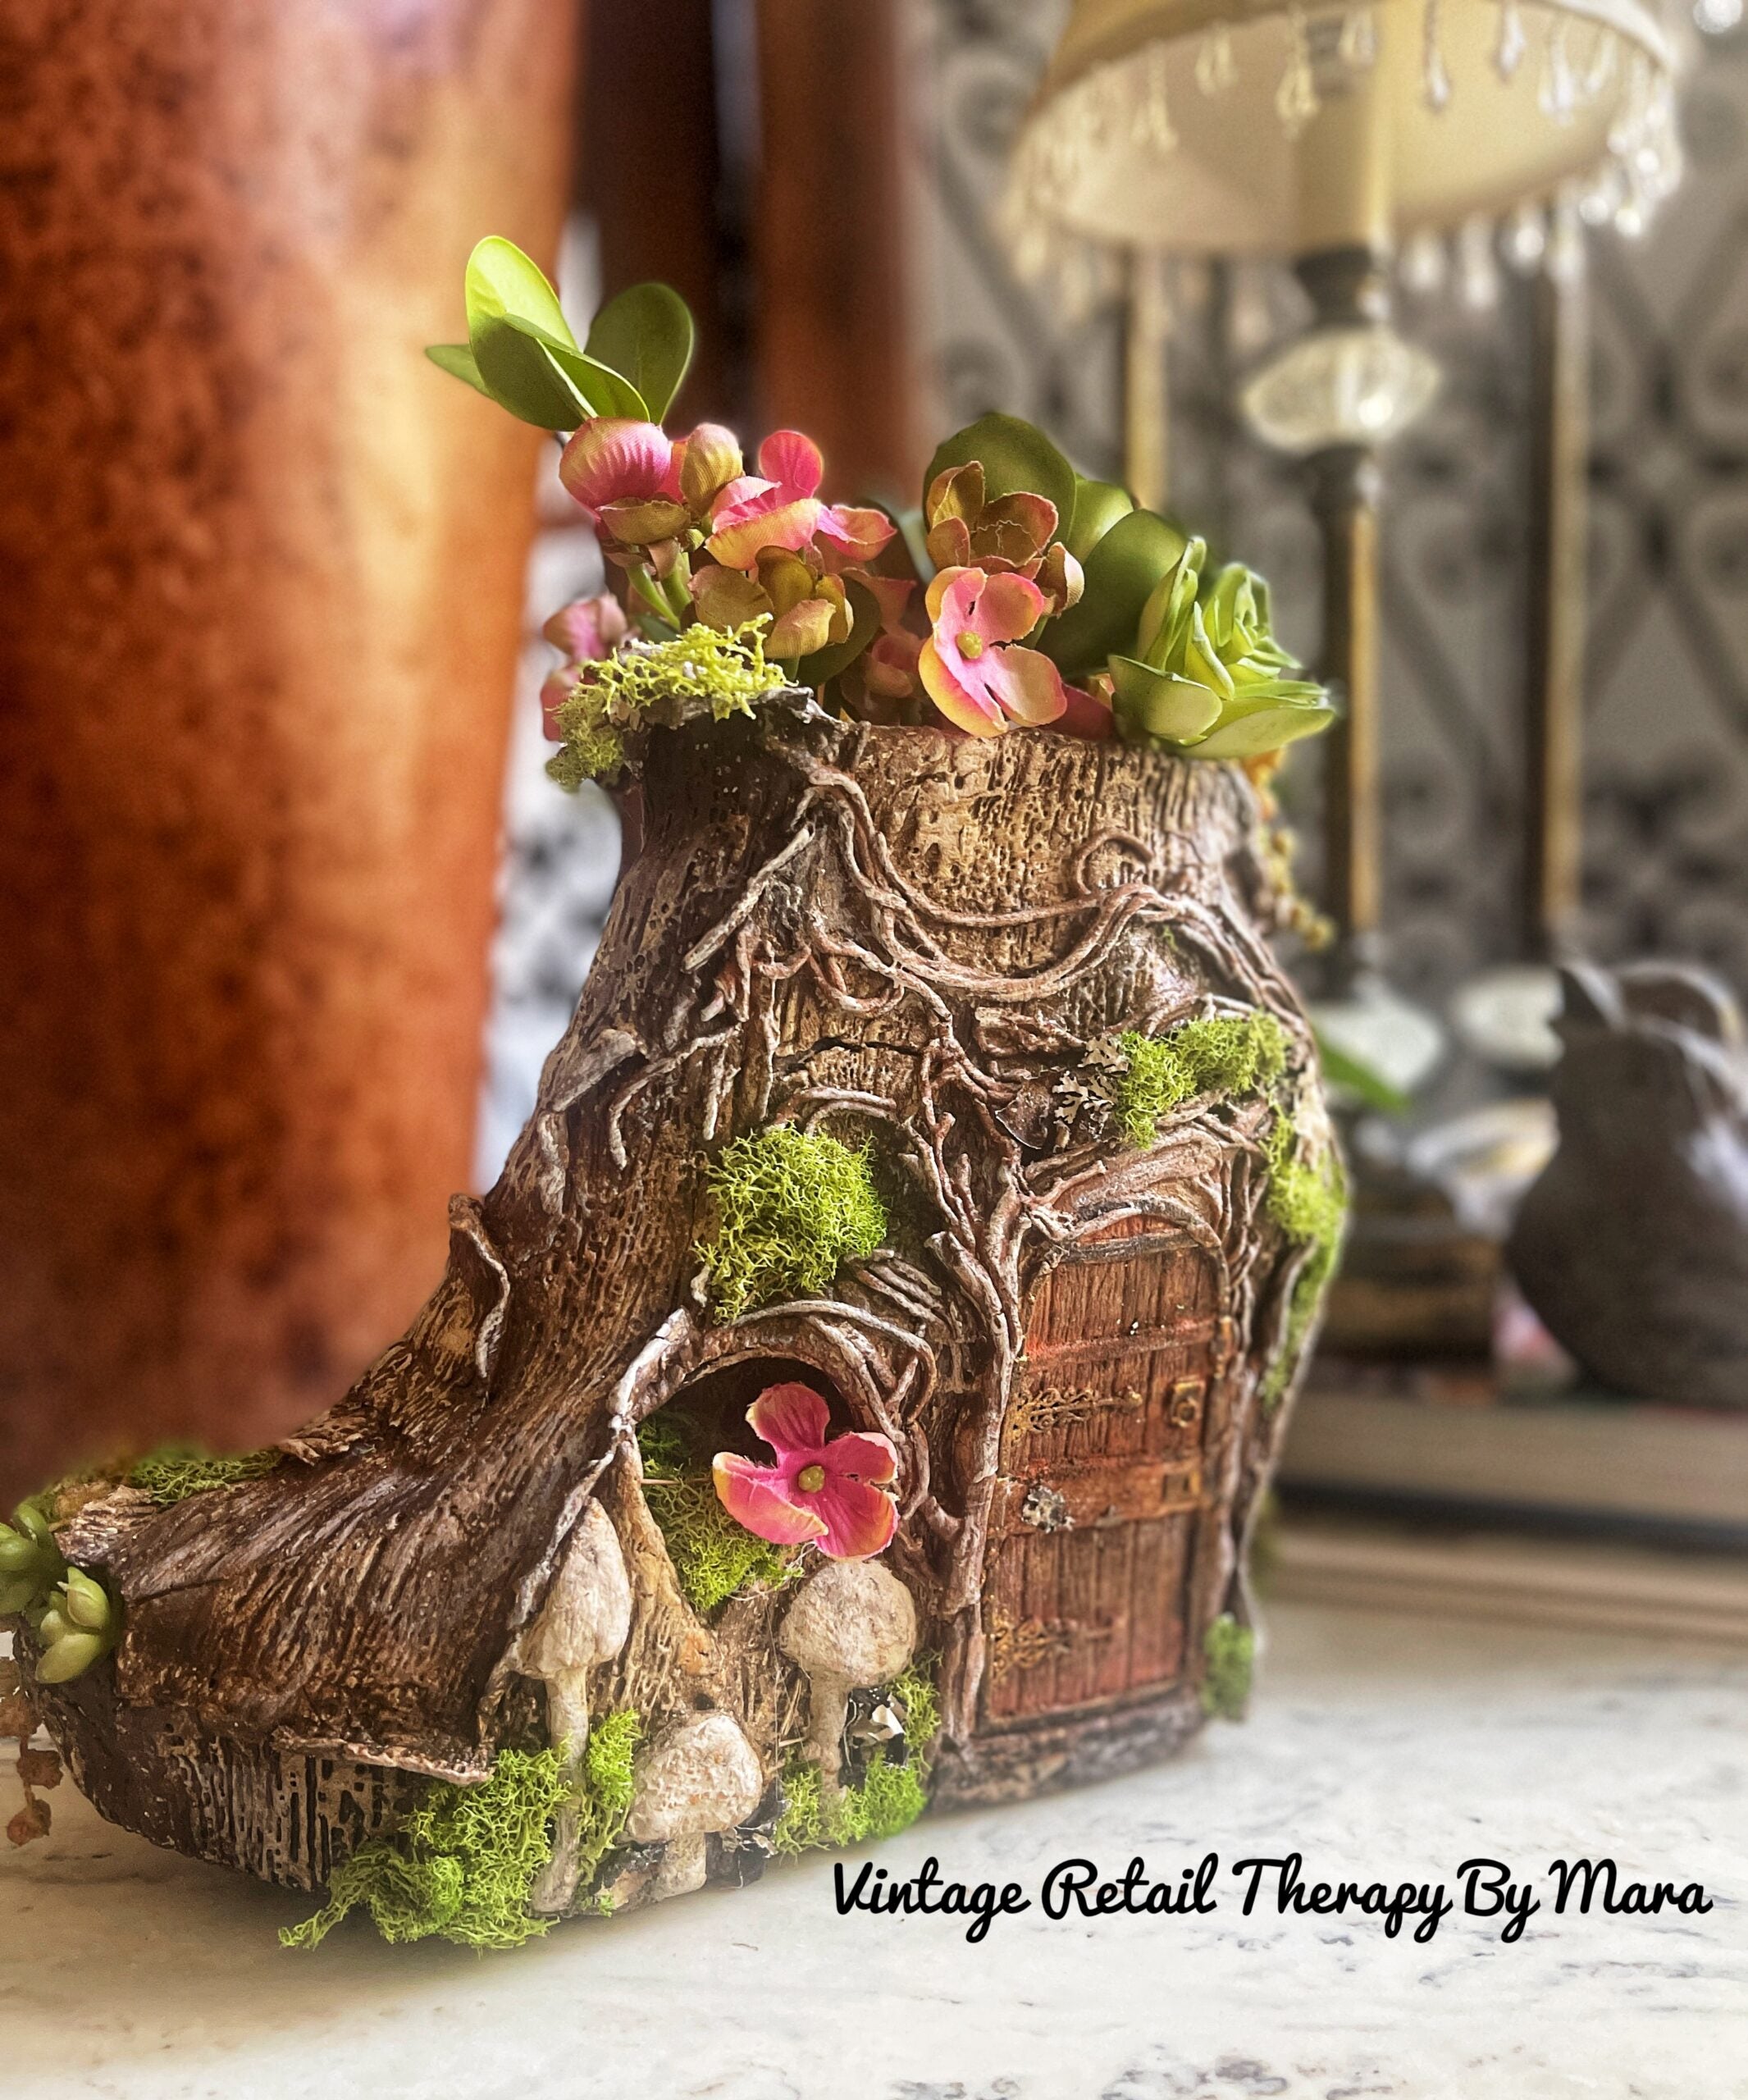 IOD Primitive Decor Moulds by Iron Orchid Designs – Nest Gifts